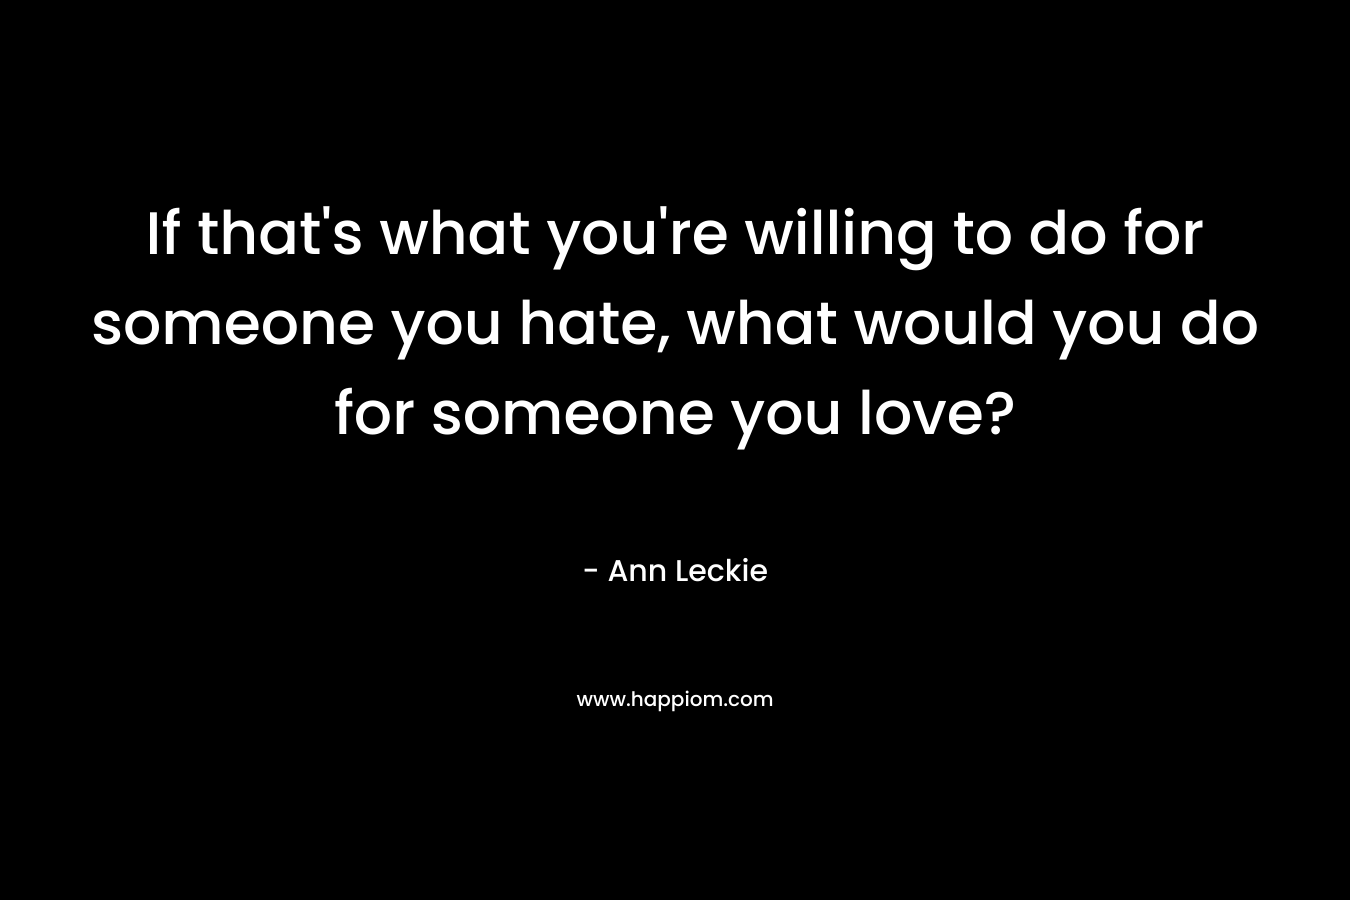 If that’s what you’re willing to do for someone you hate, what would you do for someone you love? – Ann Leckie